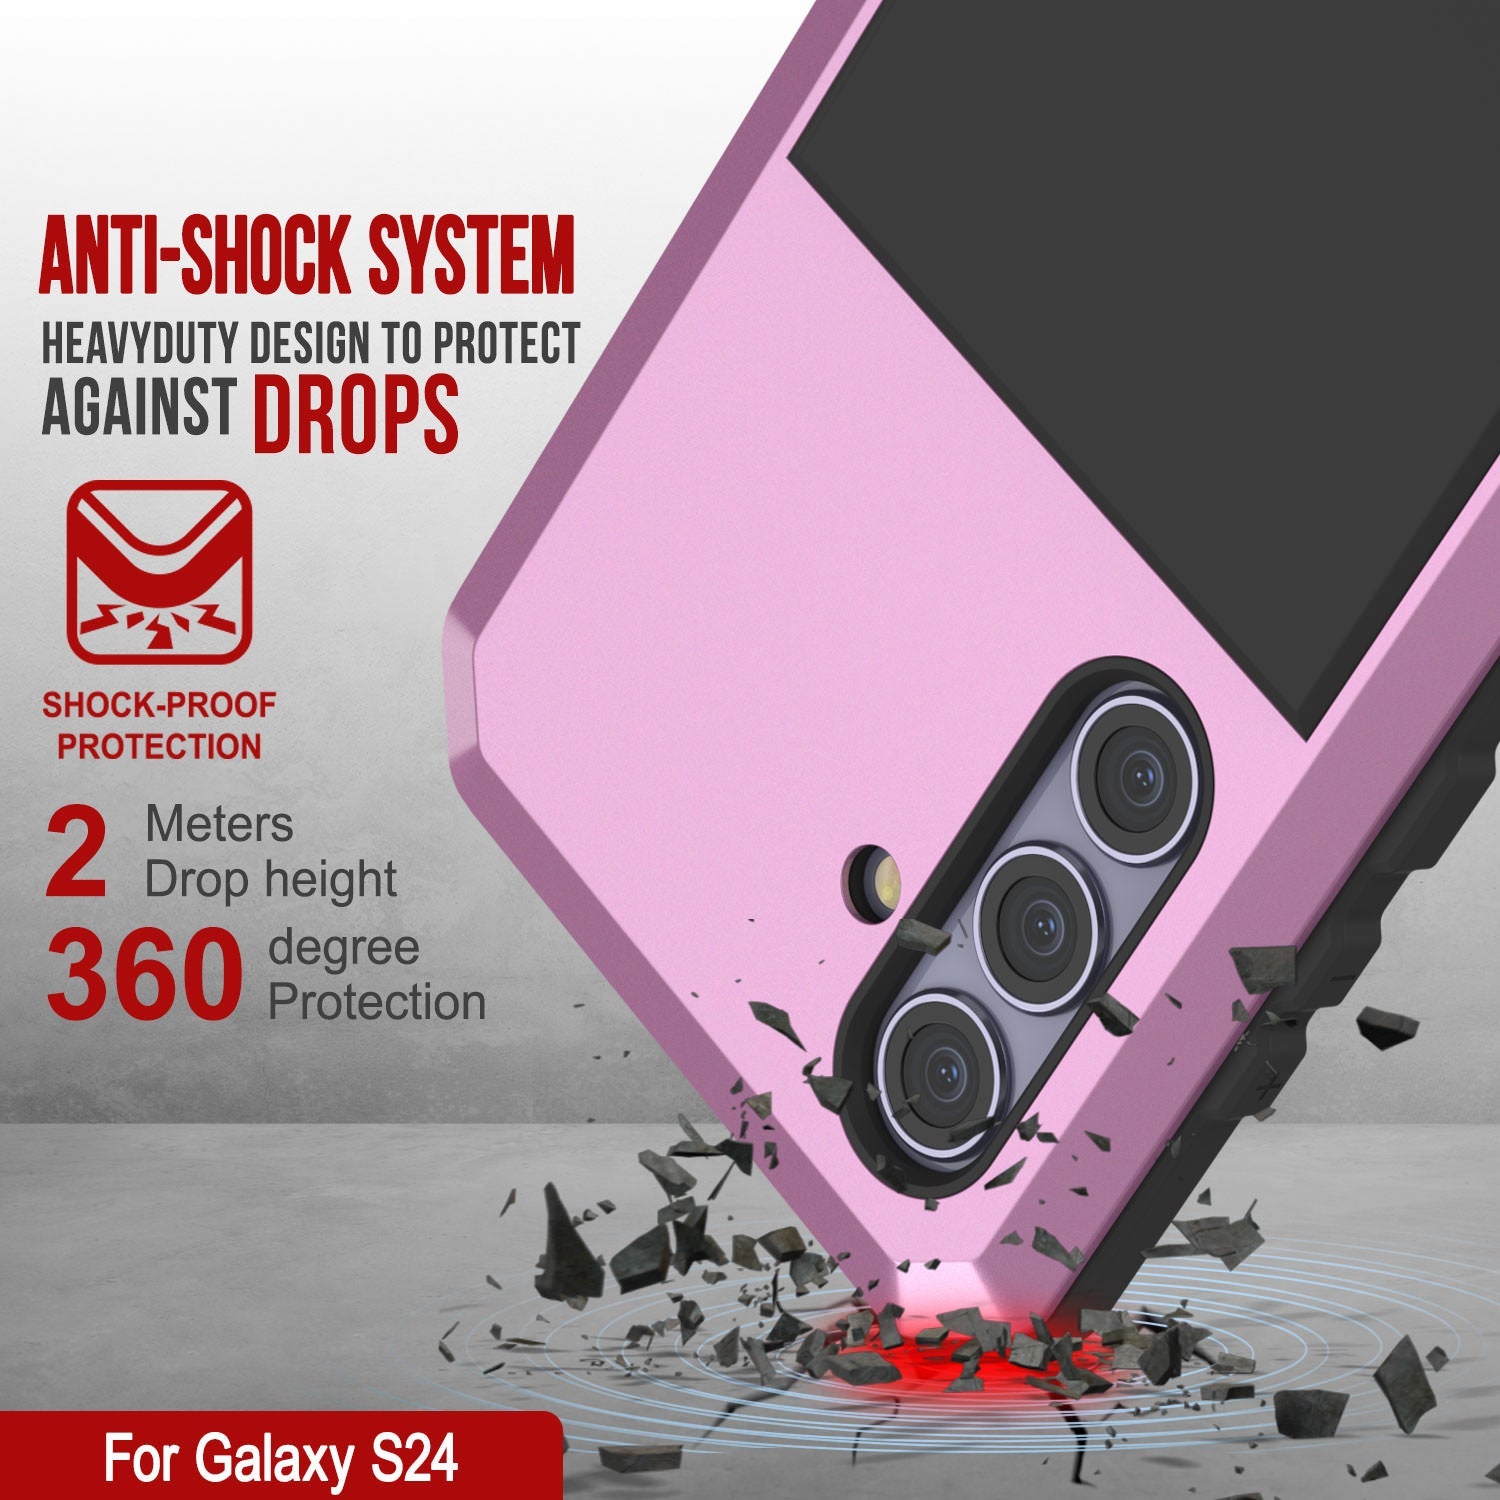 Galaxy S24 Metal Case, Heavy Duty Military Grade Armor Cover [shock proof] Full Body Hard [Pink]